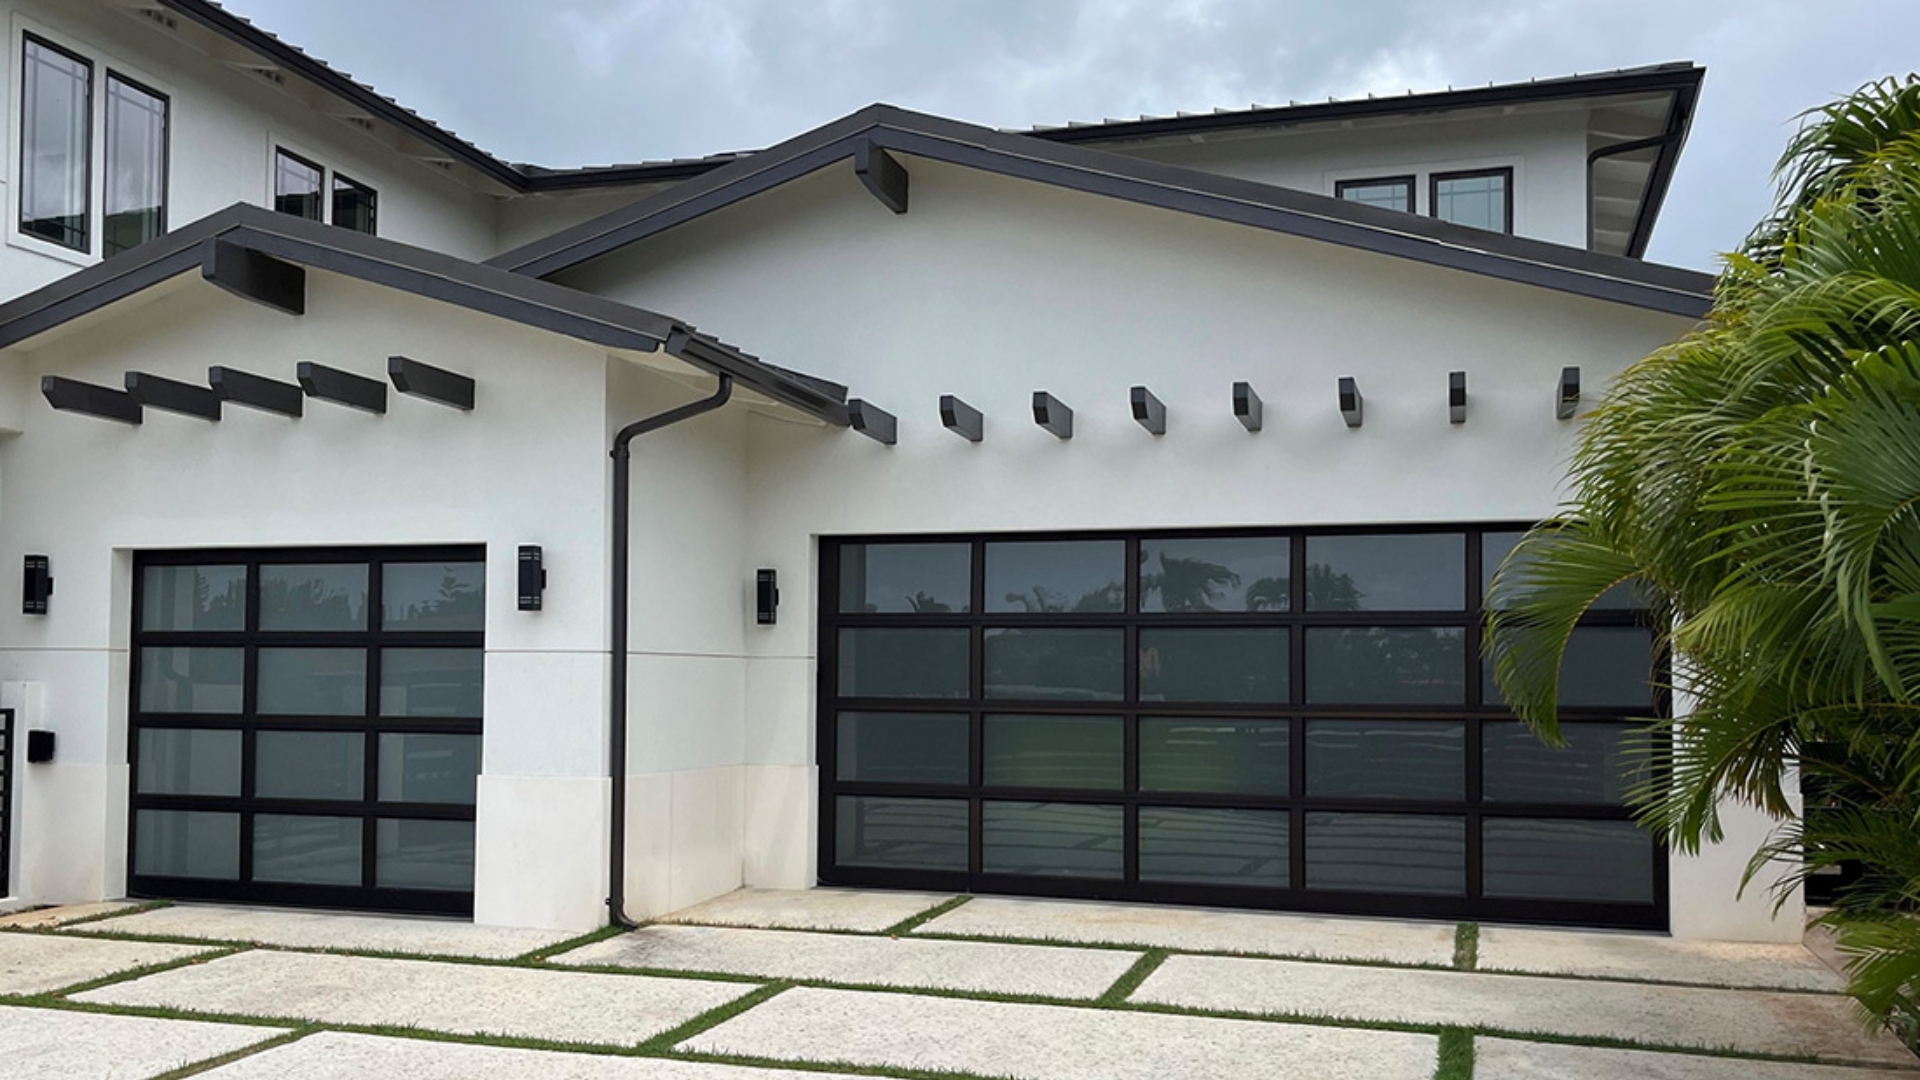 A house with glass panel garage doors